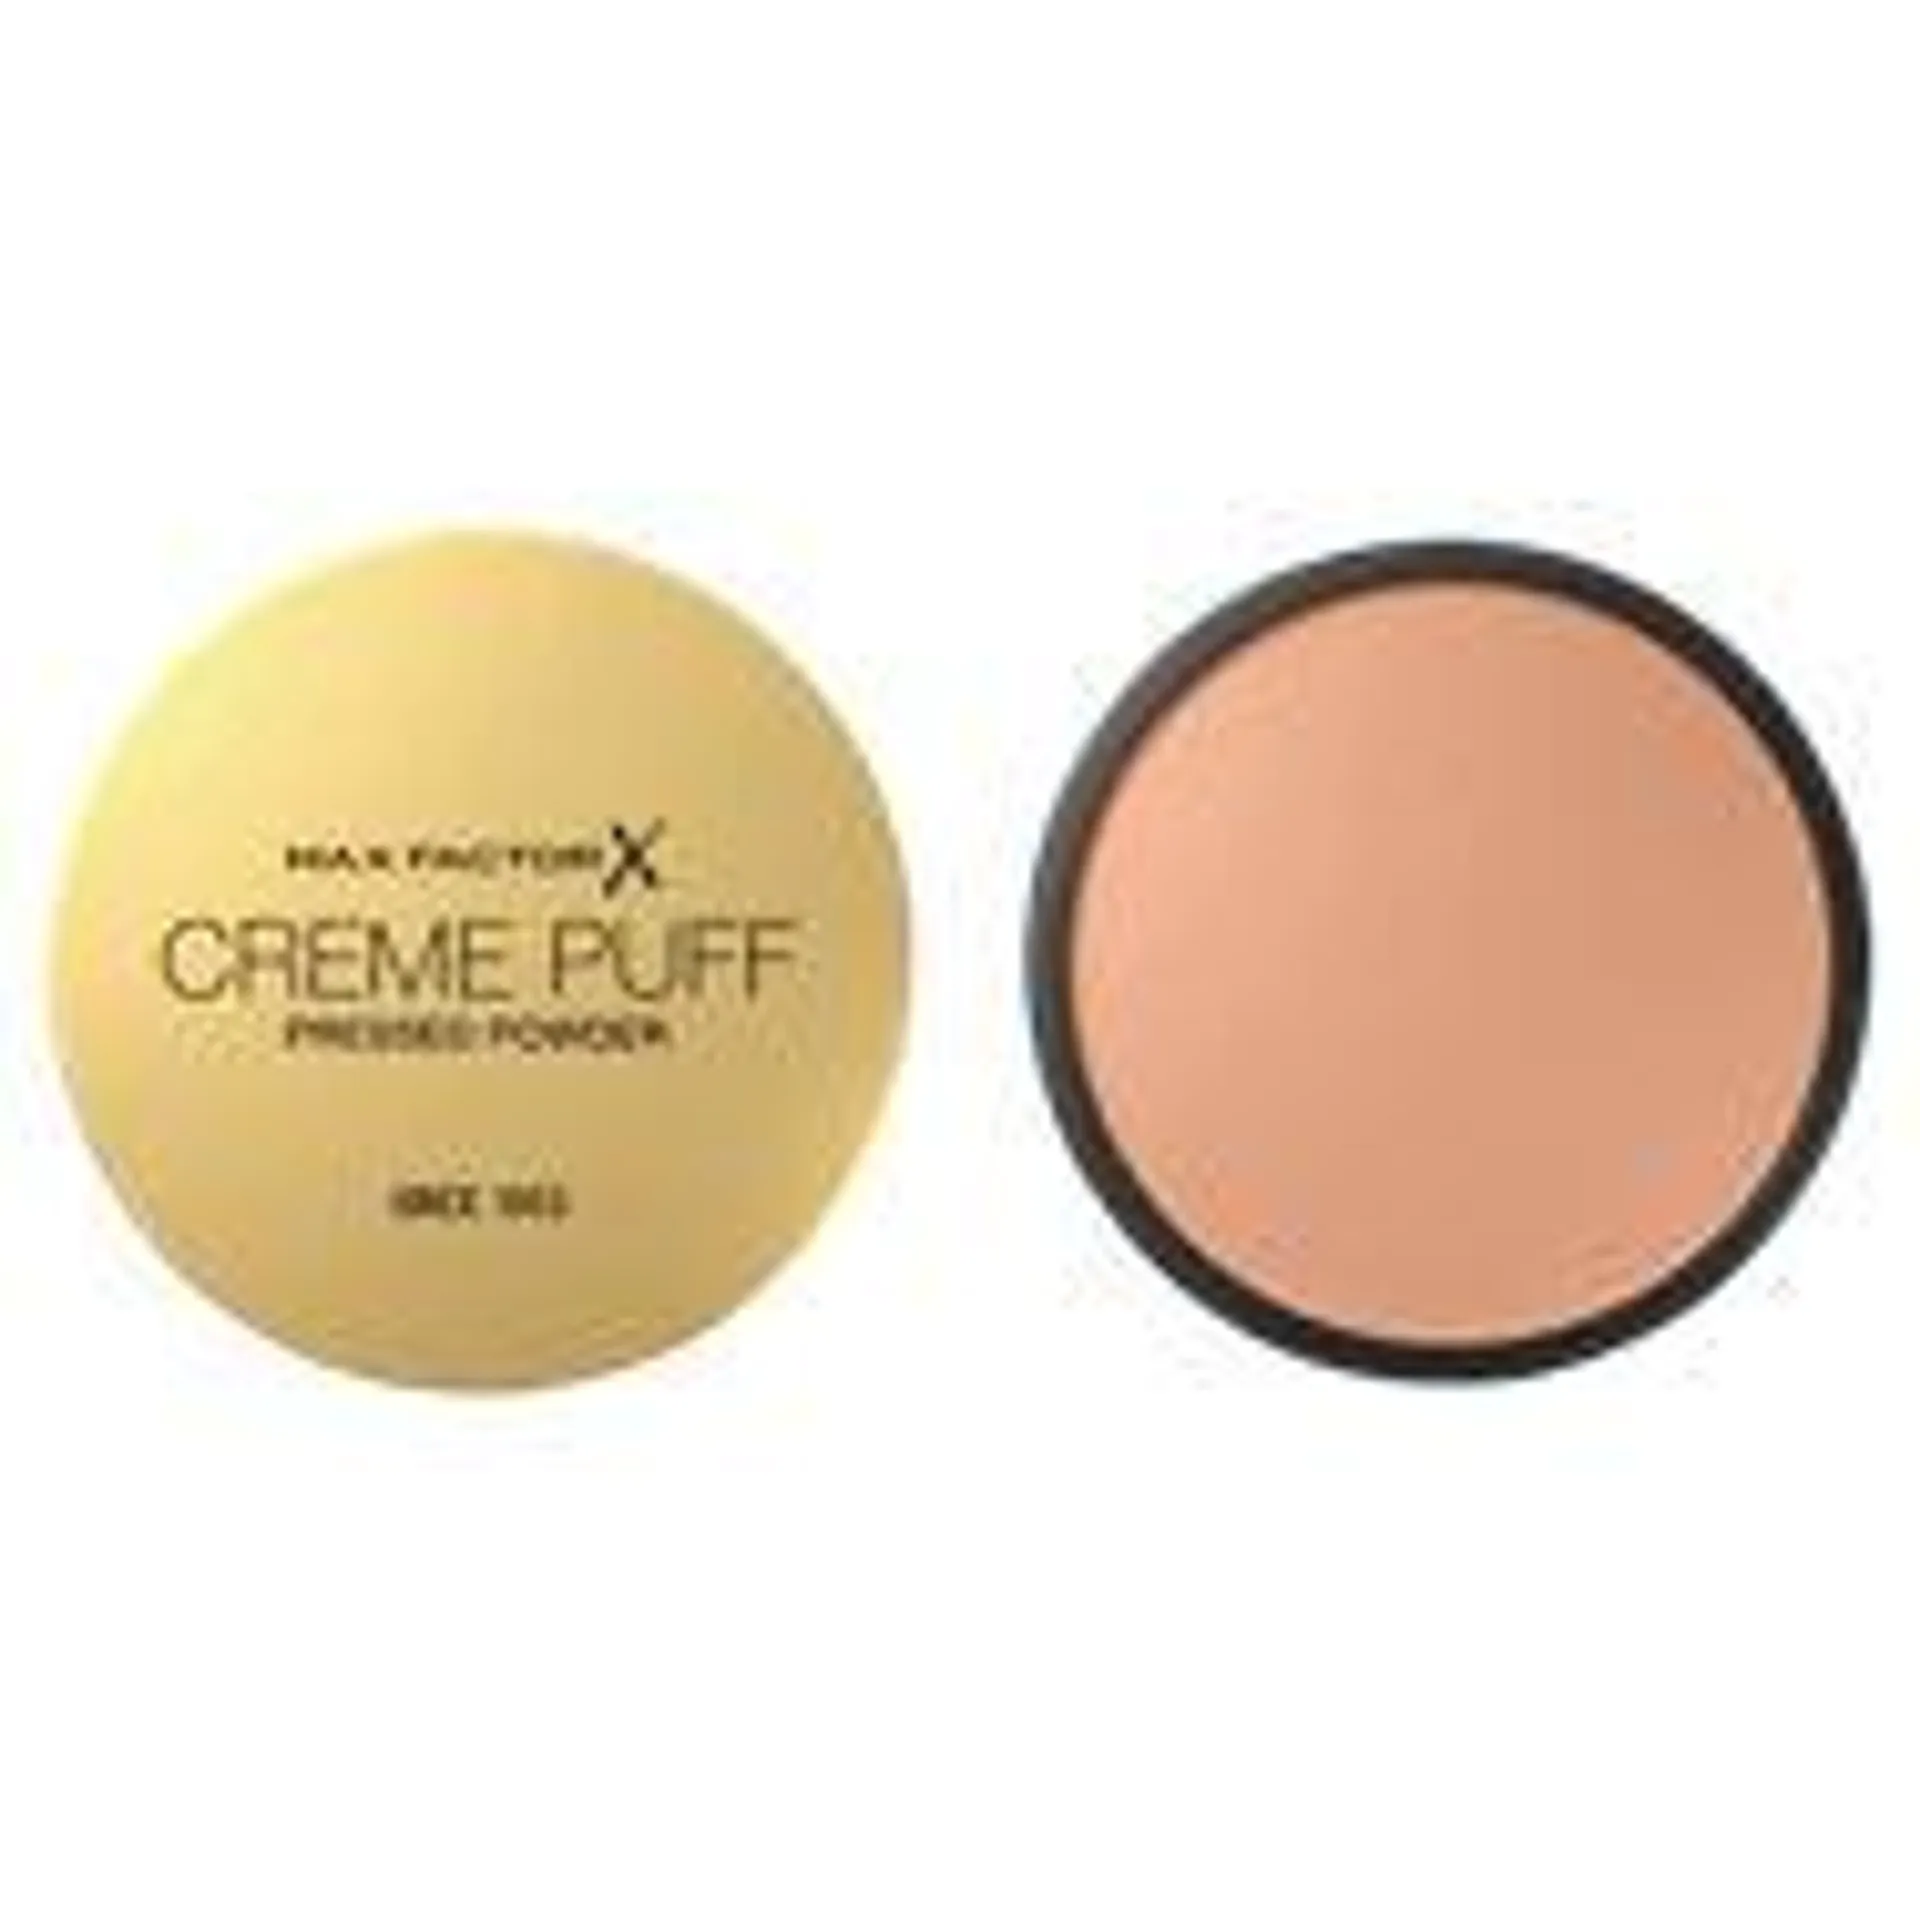 Max Factor Crème Puff Powder Compact Tempting Touch